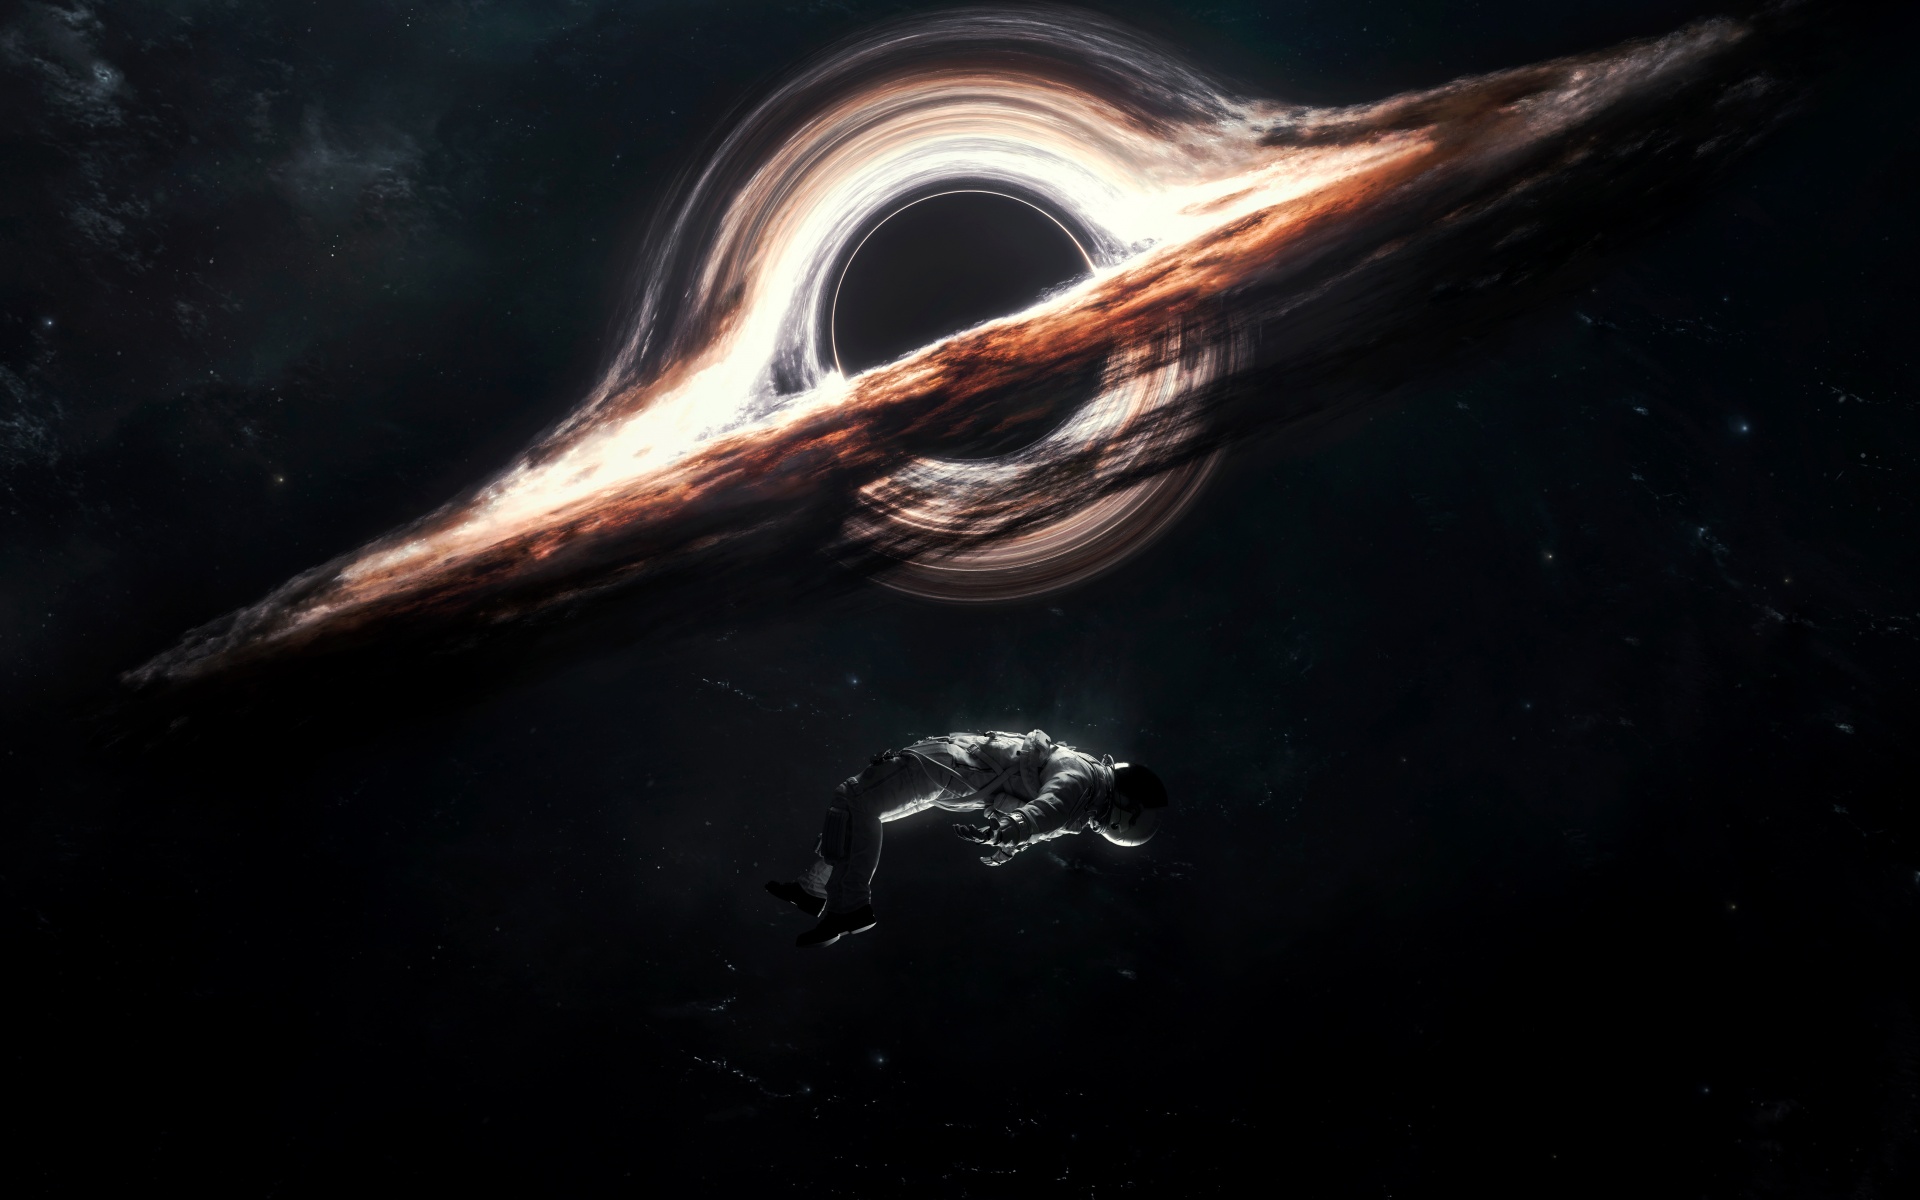 Aggregate more than 77 interstellar black hole wallpaper best - in